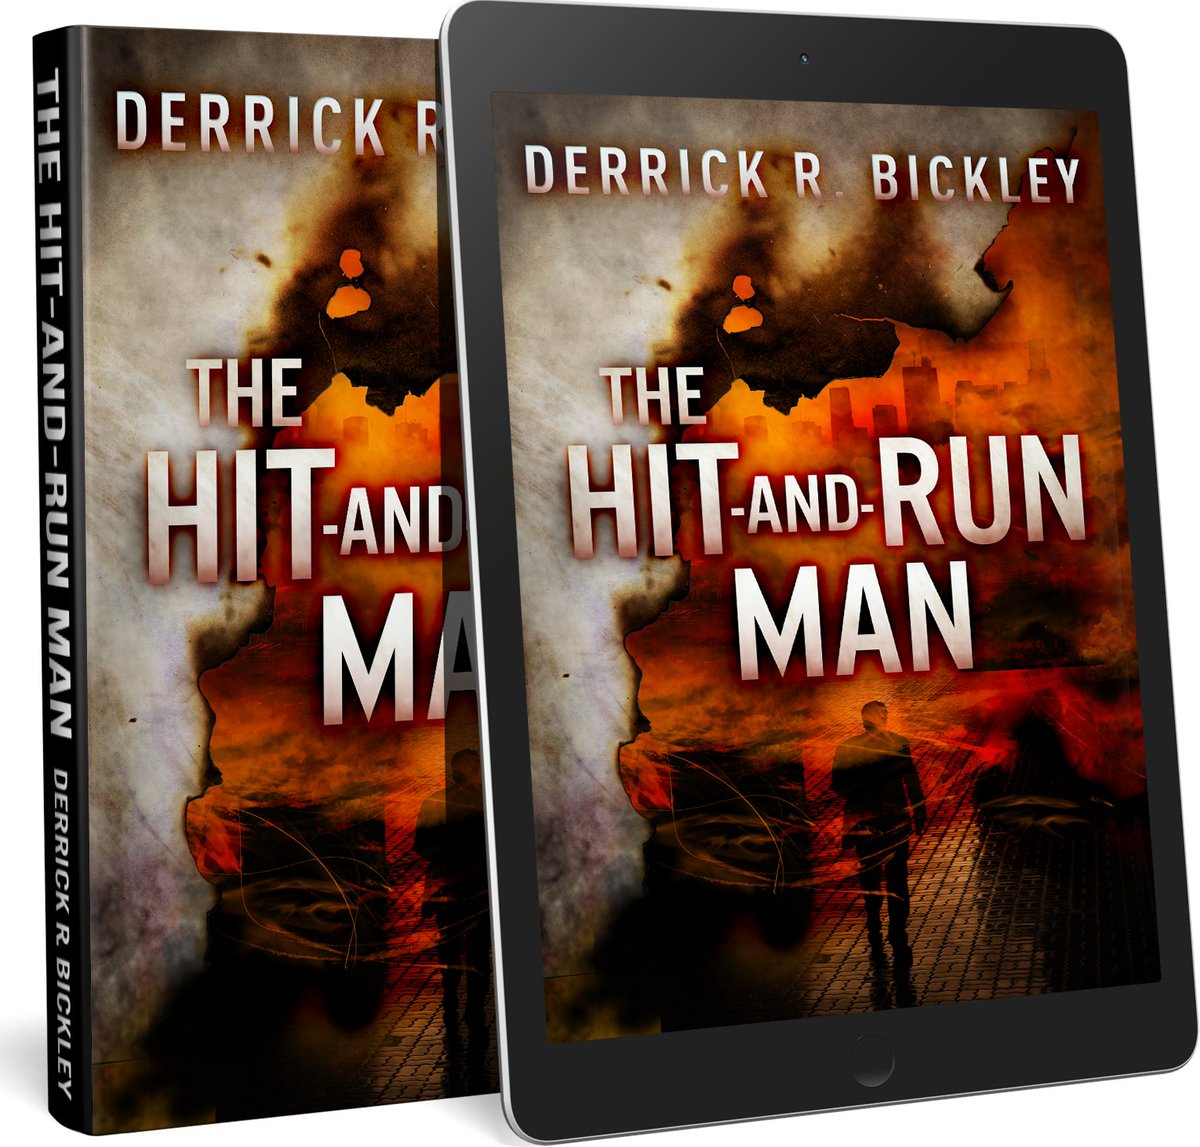 'Very clever storyline that kept me fully engrossed' mybook.to/TheHitAndRunMan THE HIT-AND-RUN MAN on #Kindle or your favourite digital store PAPERBACK HARDBACK (Amzn inc L/Print B&N inc L/Print Wmart) AUDIOBOOK #crimethrillers #NextChapterPub #mustread #crime #pageturners